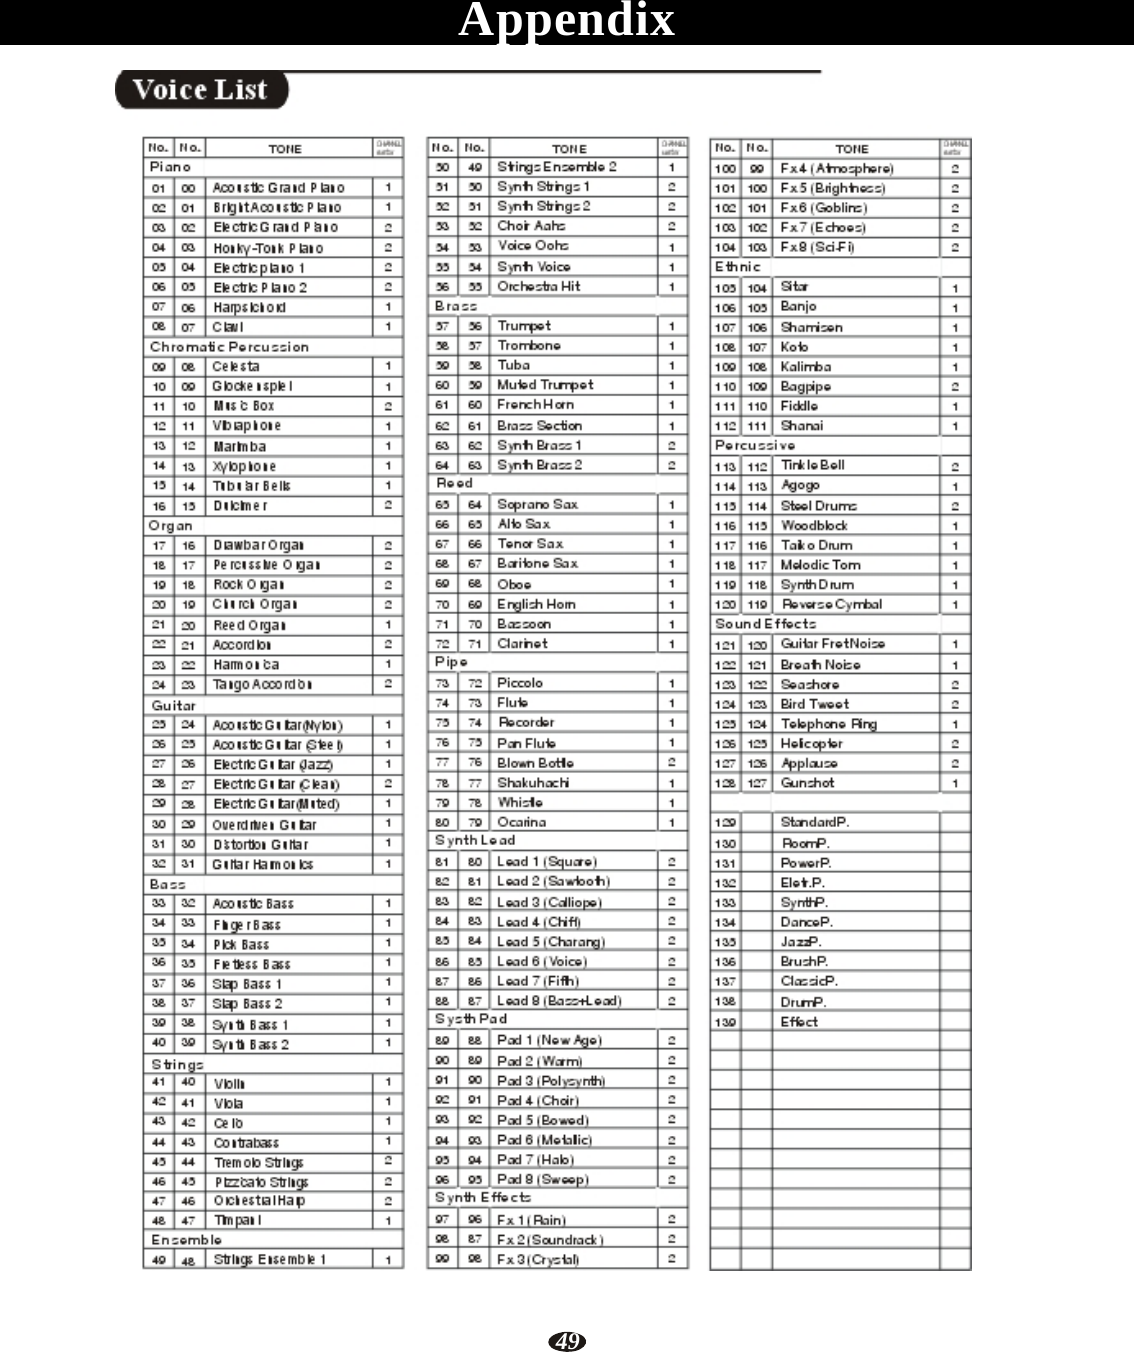 49 CHANNEL number CHANNEL number    Appendix   Voice List   